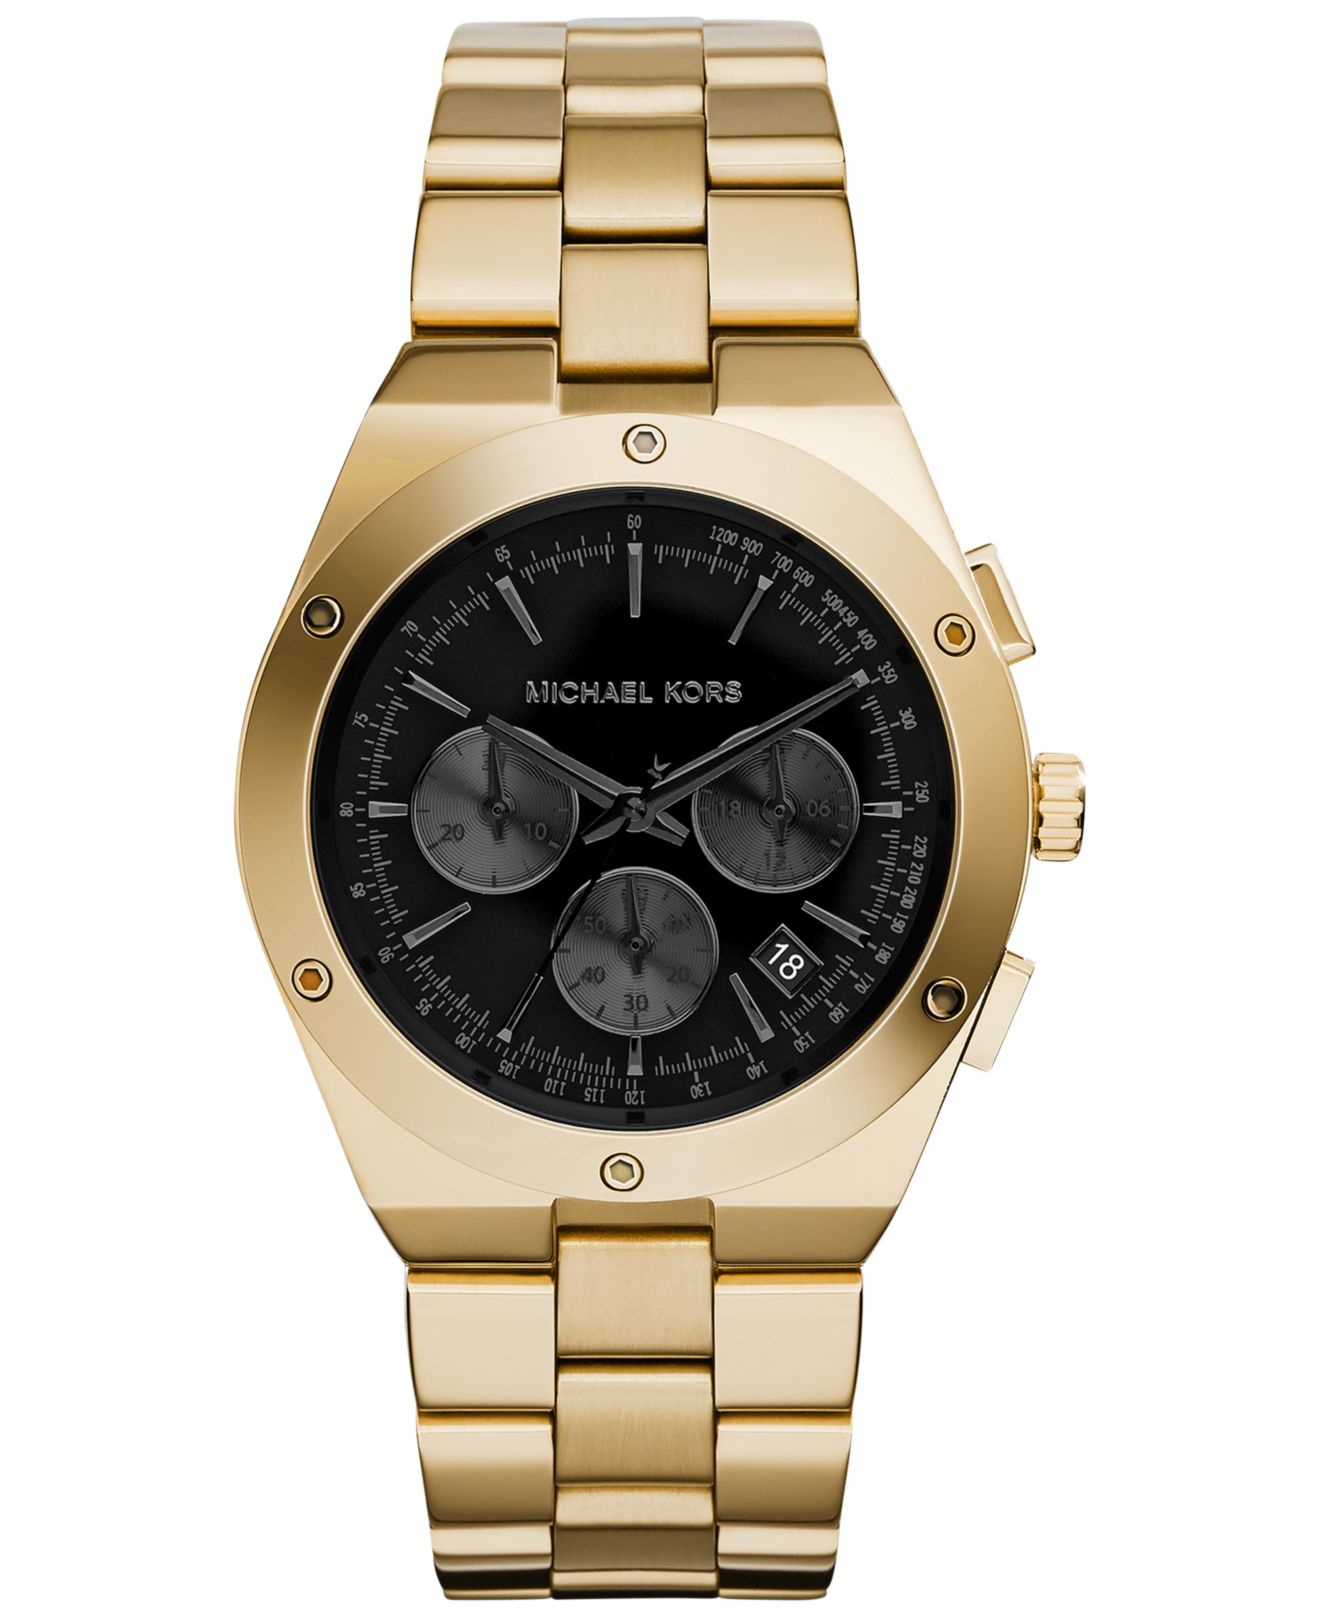 michael kors women's gold watch with black face